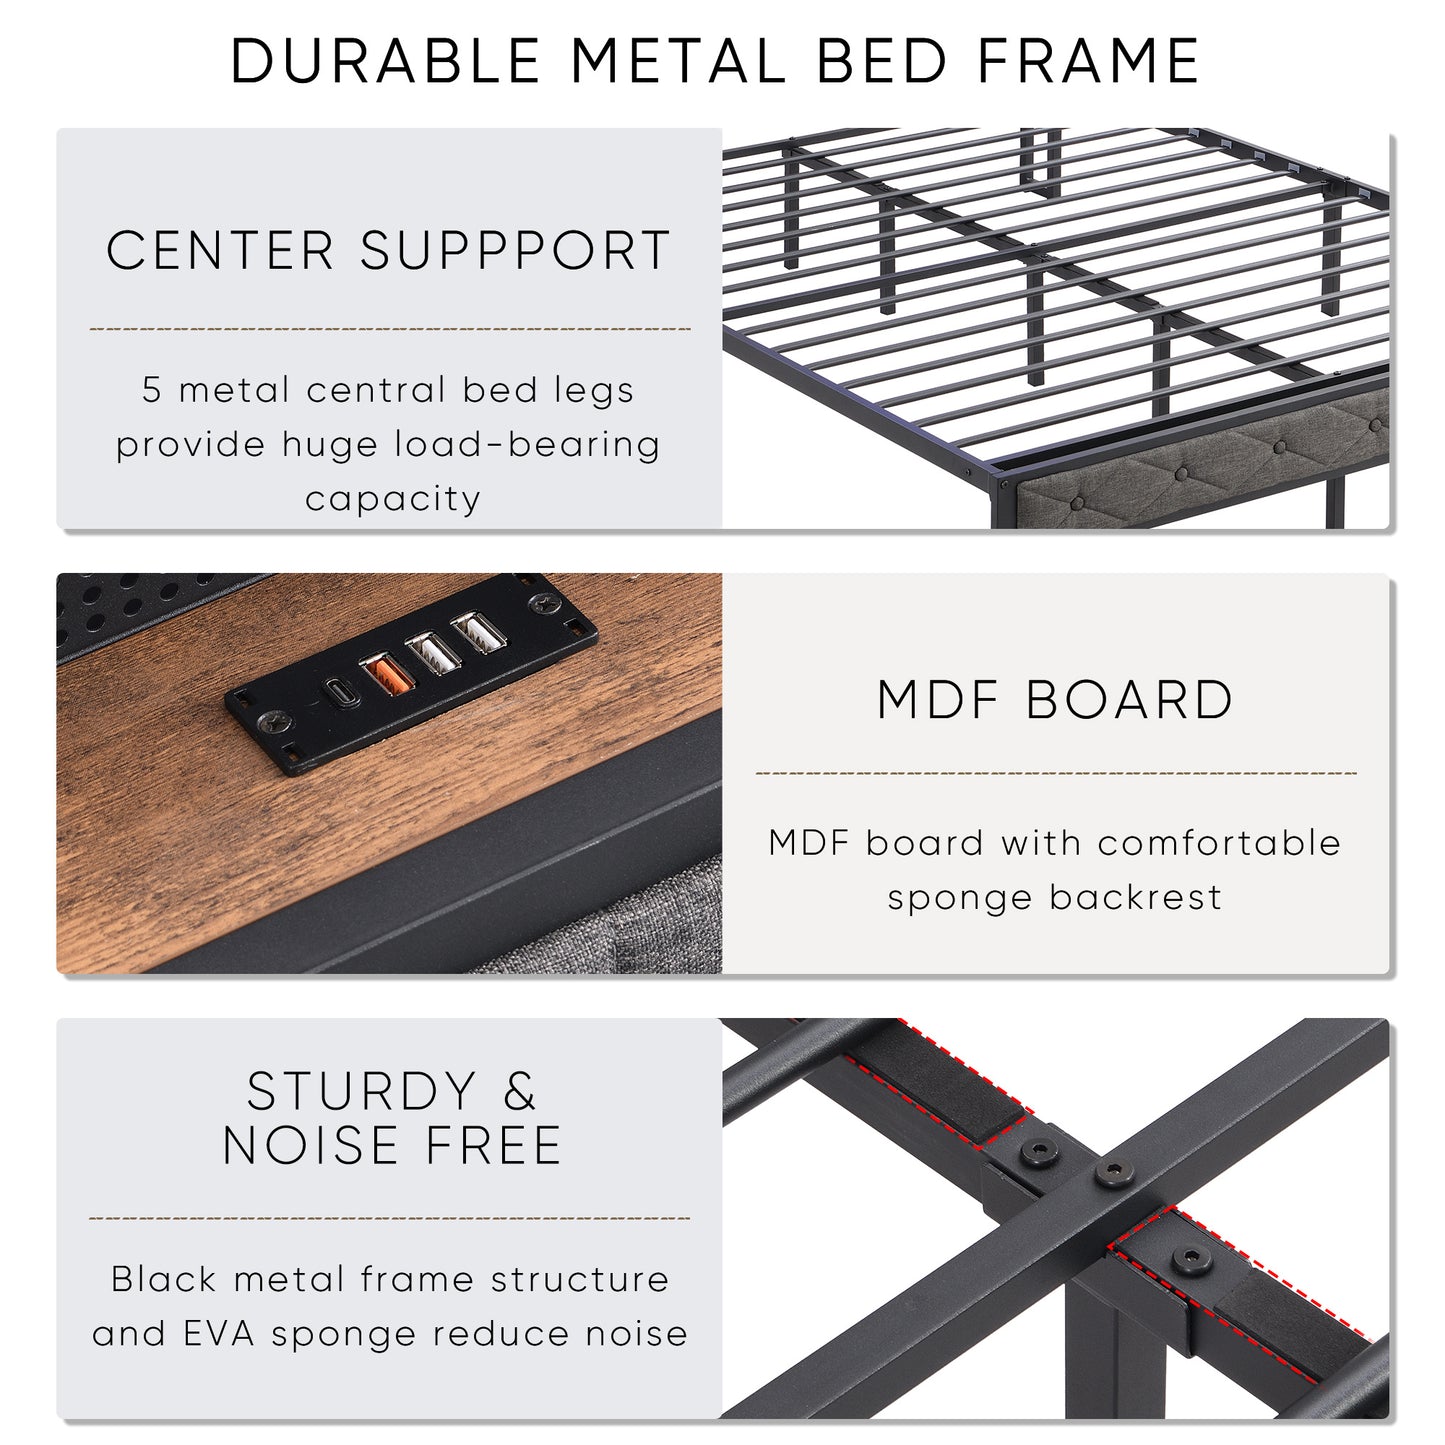 queen bed frame with storage headboard, charging station and led lights,dark gray